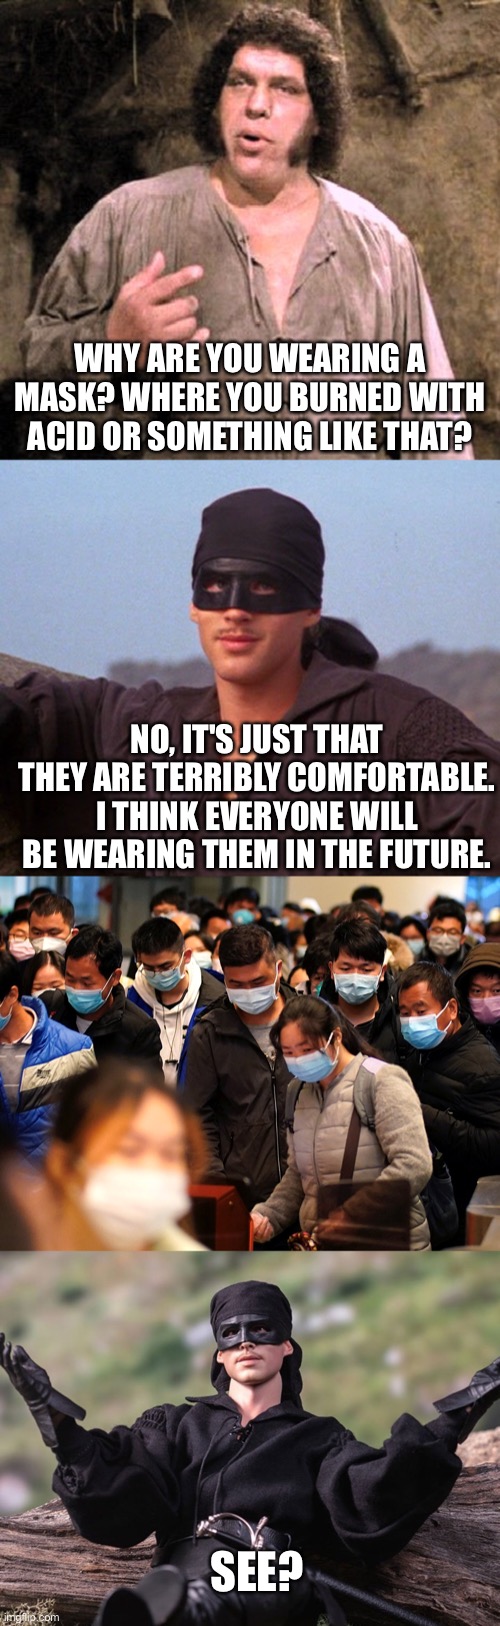 1987 to 2020 | WHY ARE YOU WEARING A MASK? WHERE YOU BURNED WITH ACID OR SOMETHING LIKE THAT? NO, IT'S JUST THAT THEY ARE TERRIBLY COMFORTABLE. I THINK EVERYONE WILL BE WEARING THEM IN THE FUTURE. SEE? | image tagged in princess bride,covid-19,memes | made w/ Imgflip meme maker